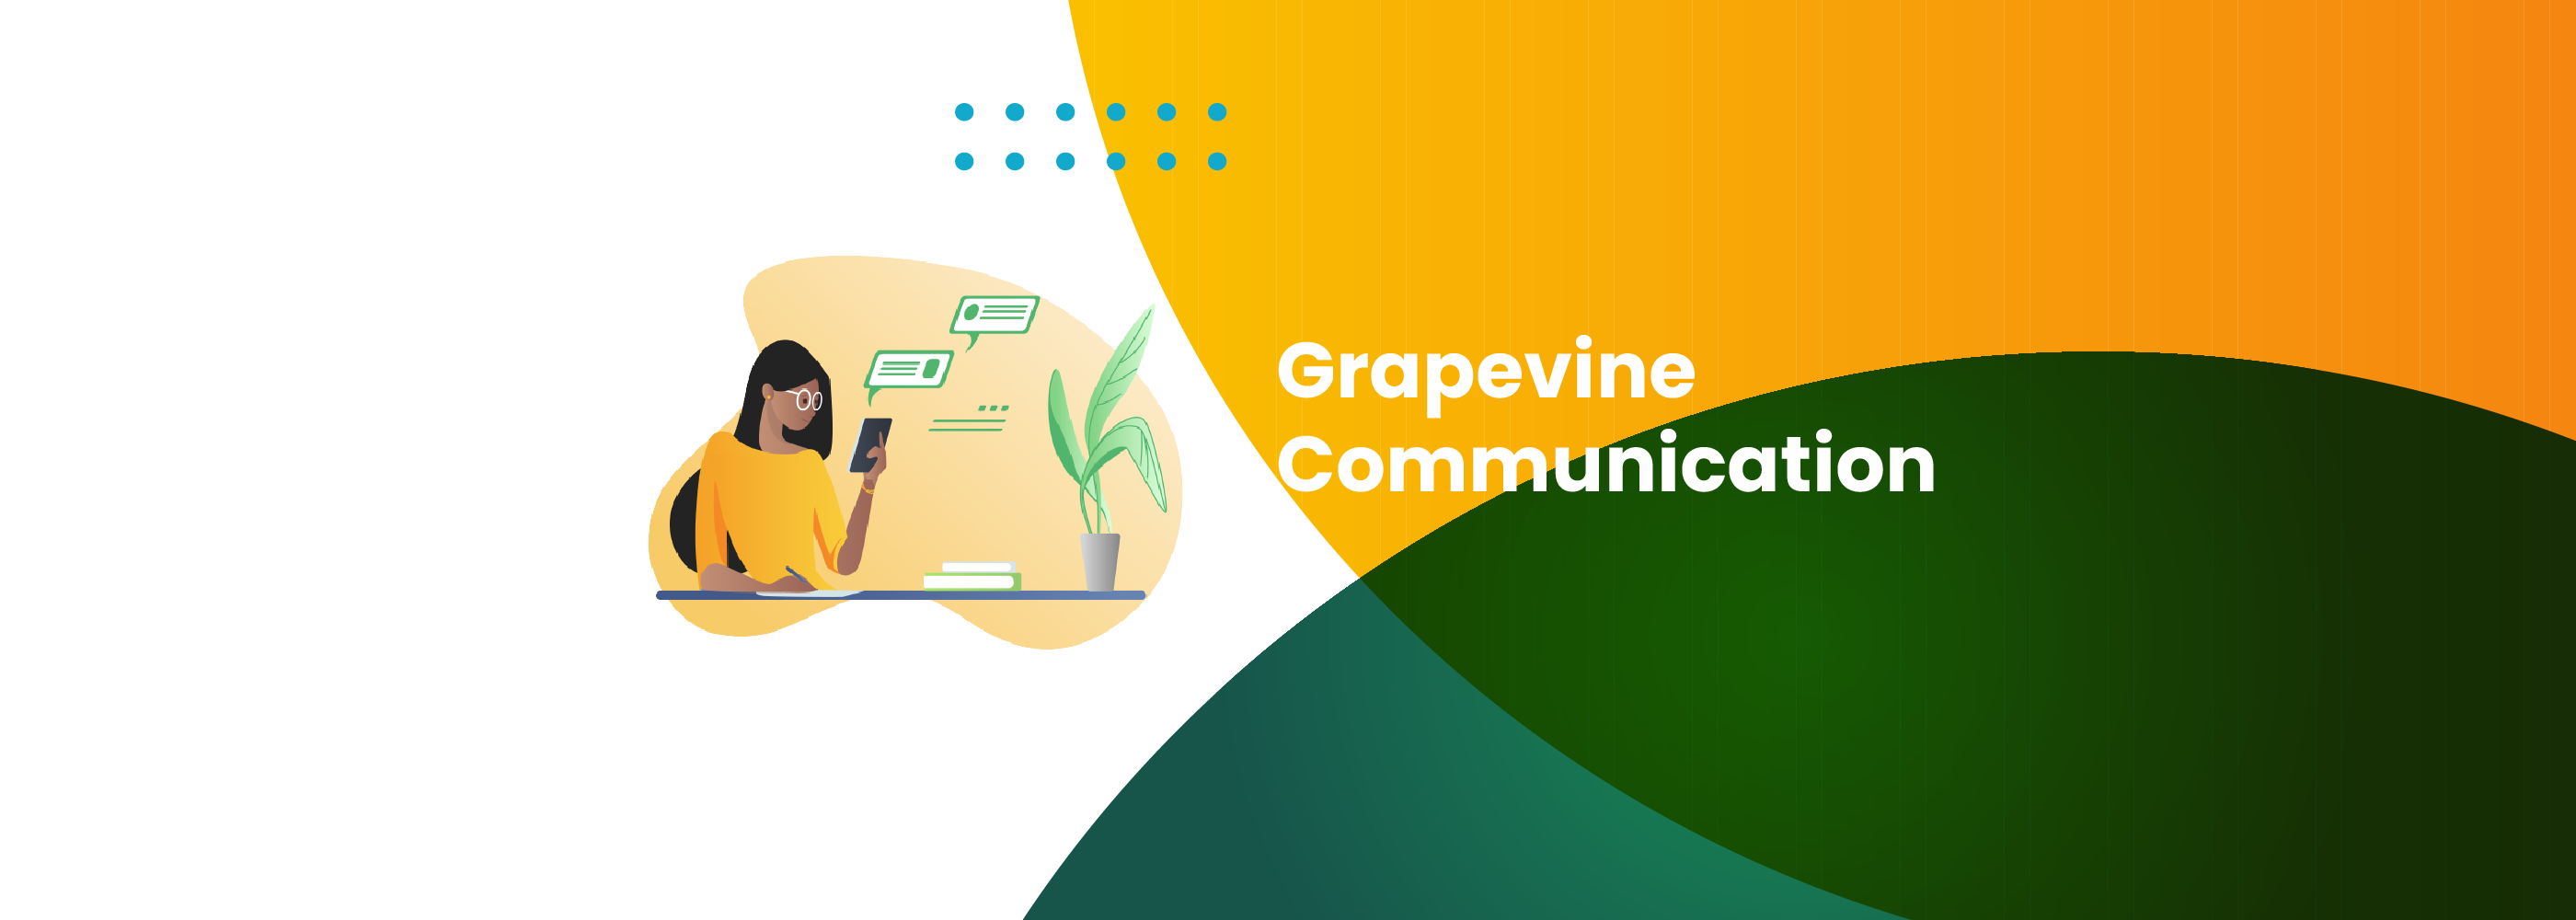 role of grapevine communication in an organization